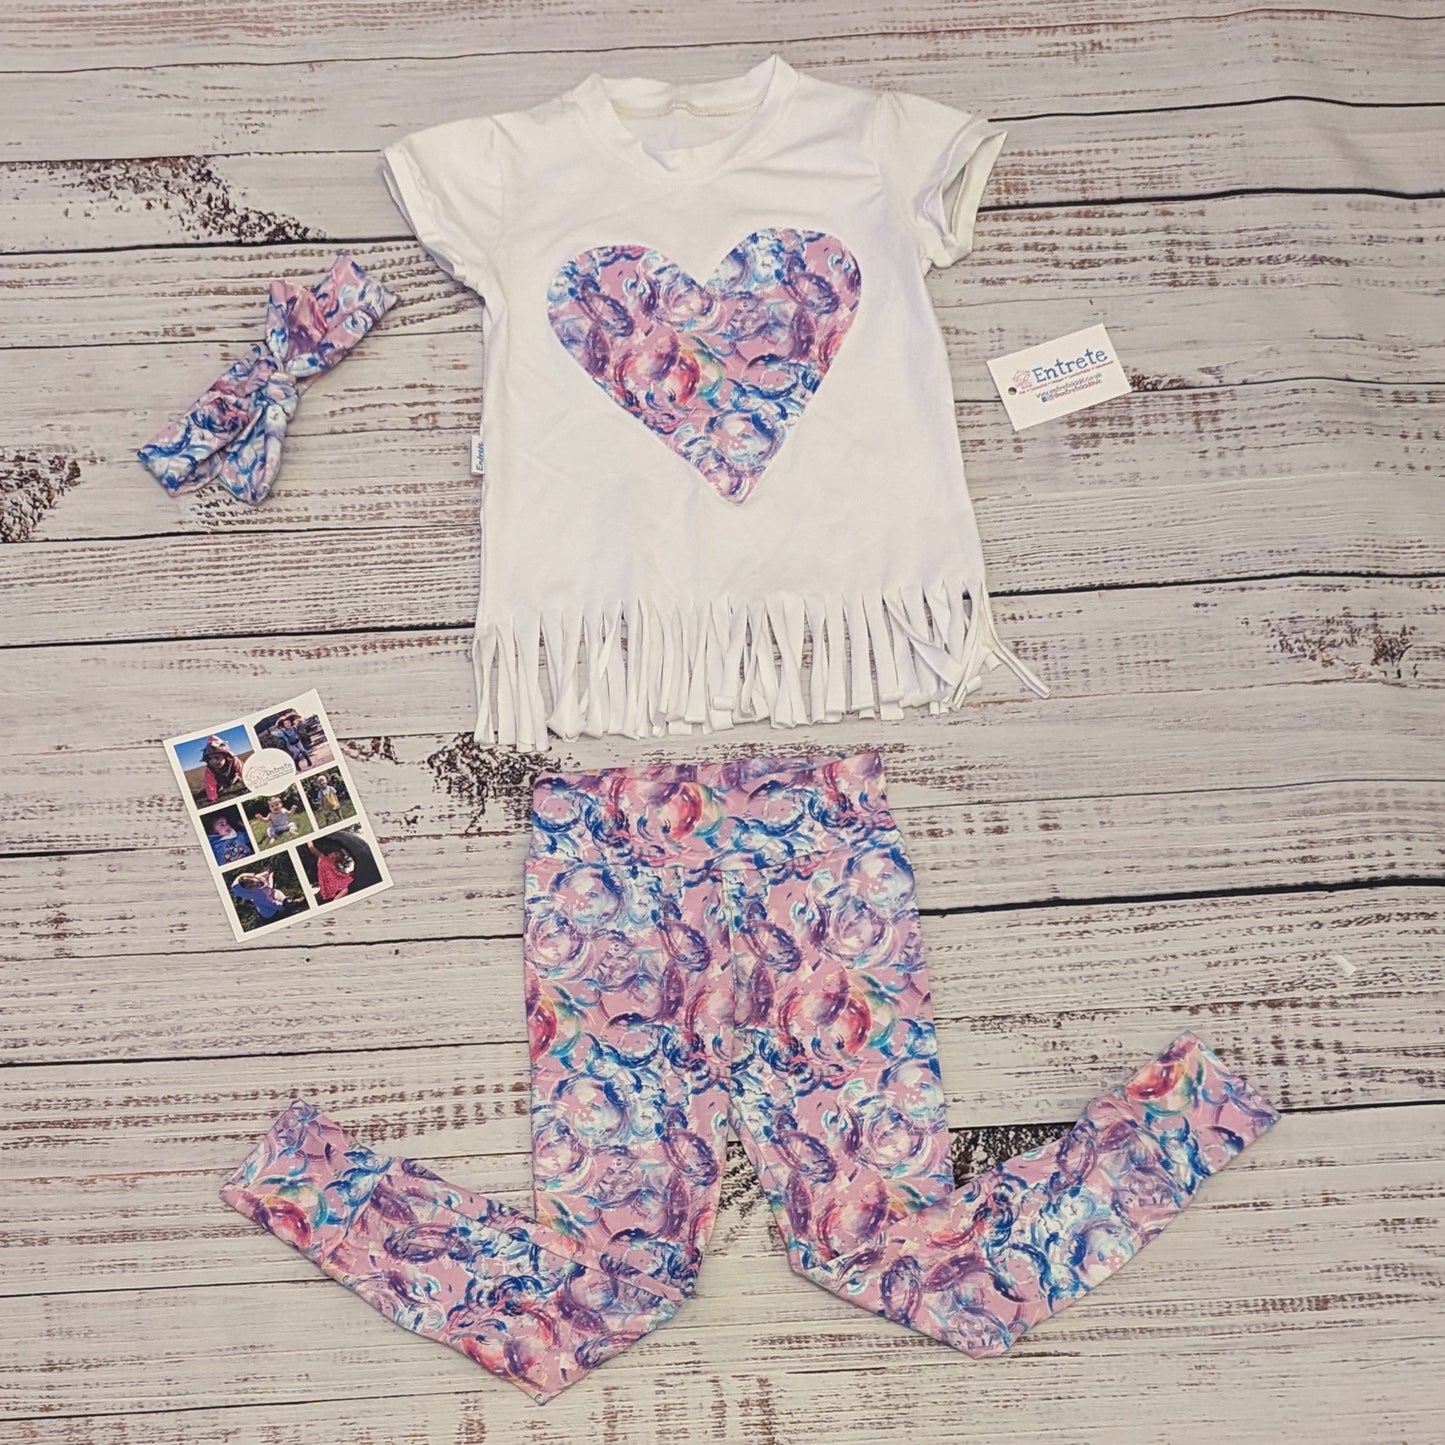 The bubblegum pink bubbles leggings shown as an outfit with matching pink bubble heart tassel tee and headband.